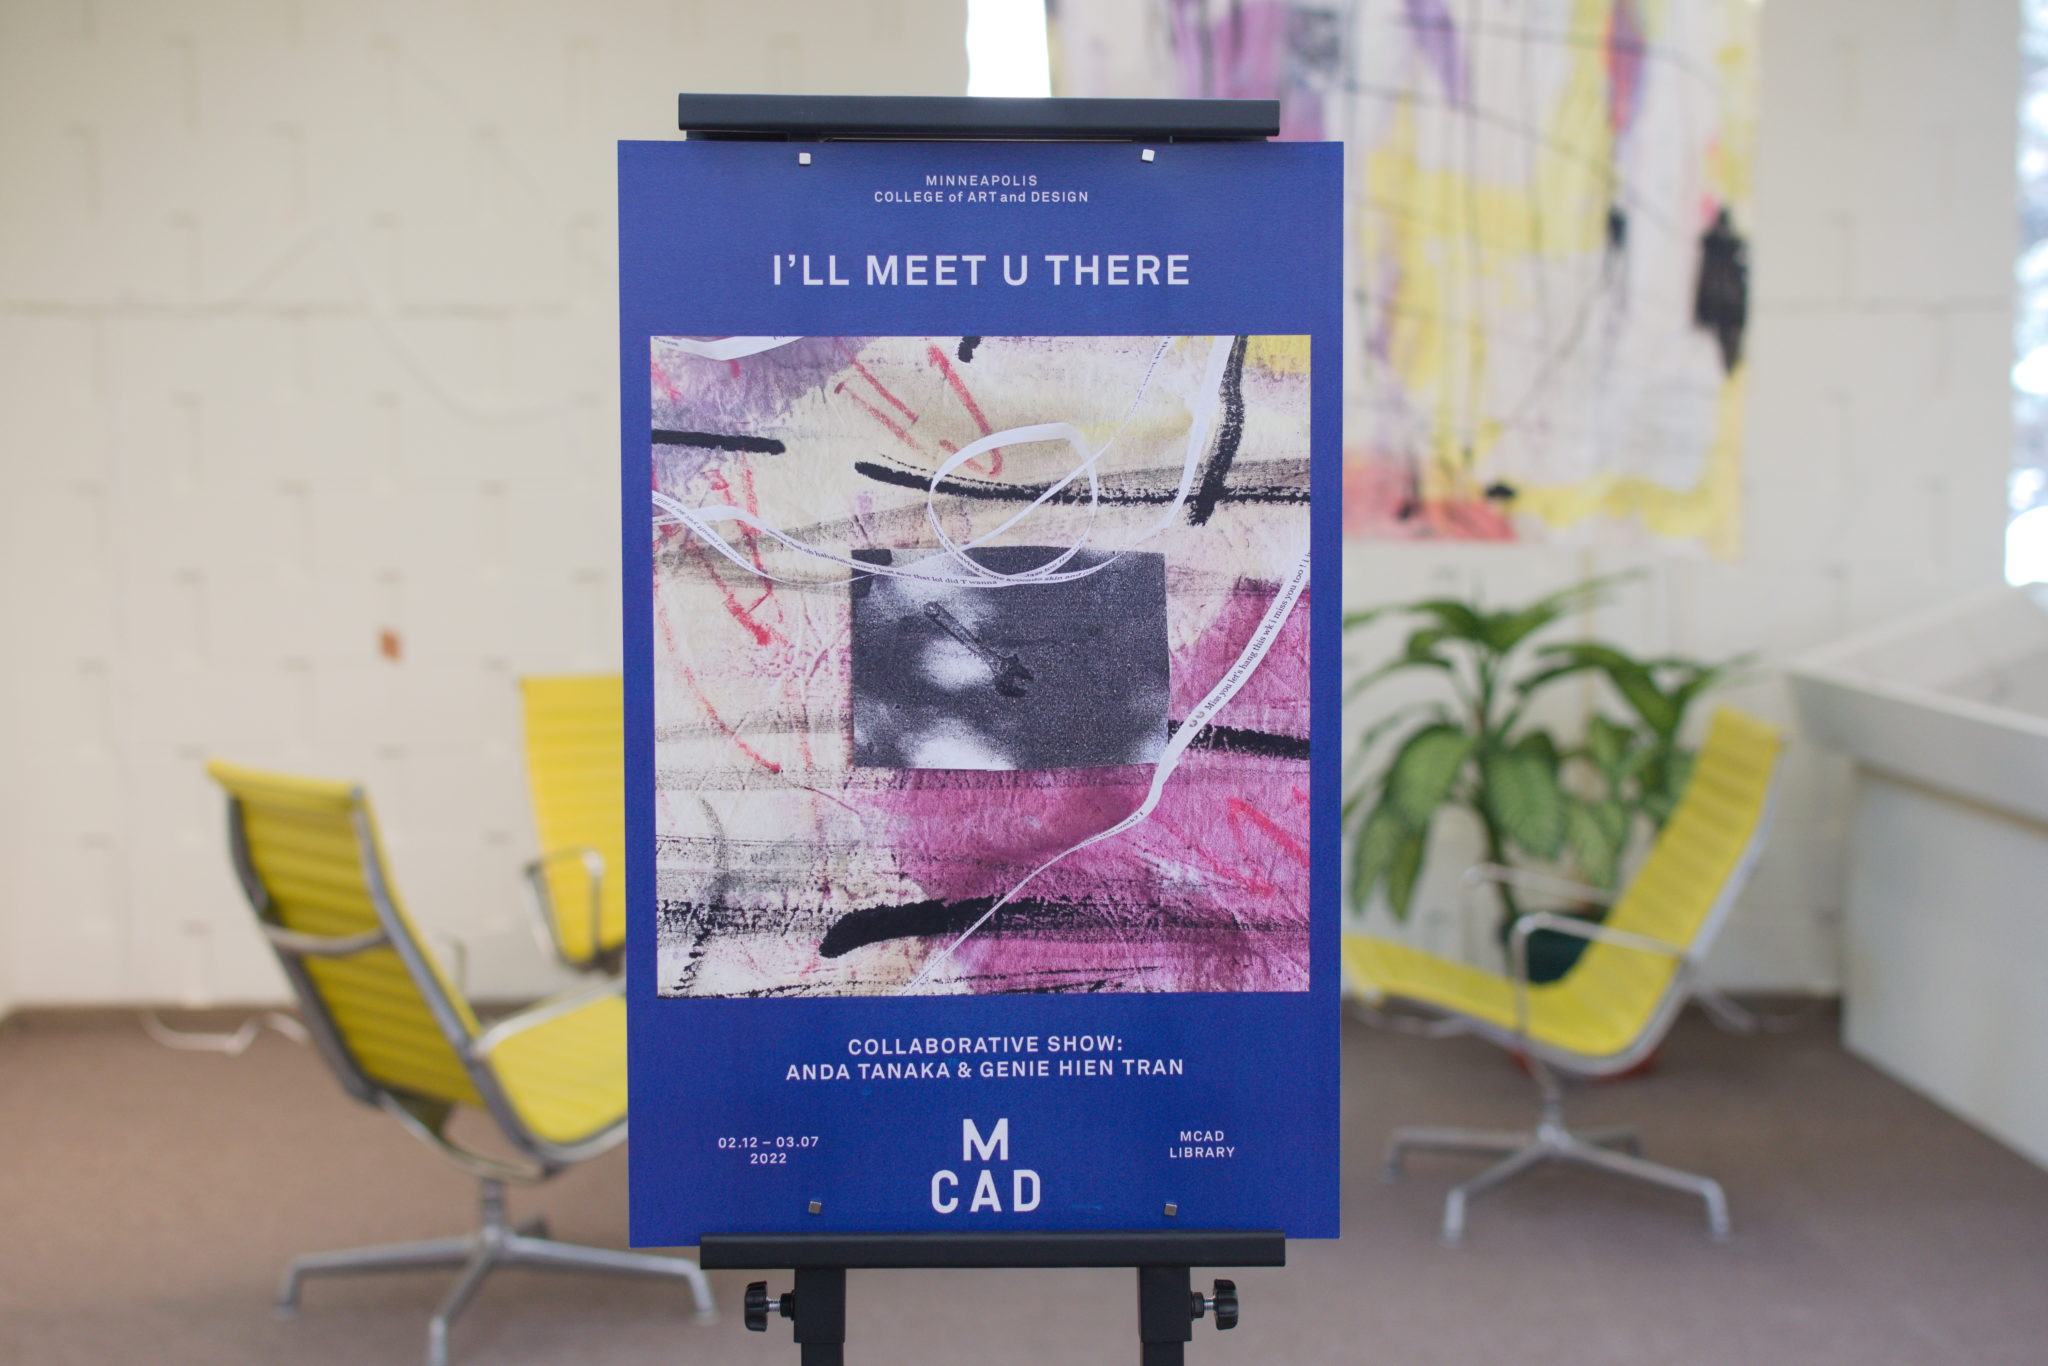 MCAD Library Exhibition: I’ll Meet U There